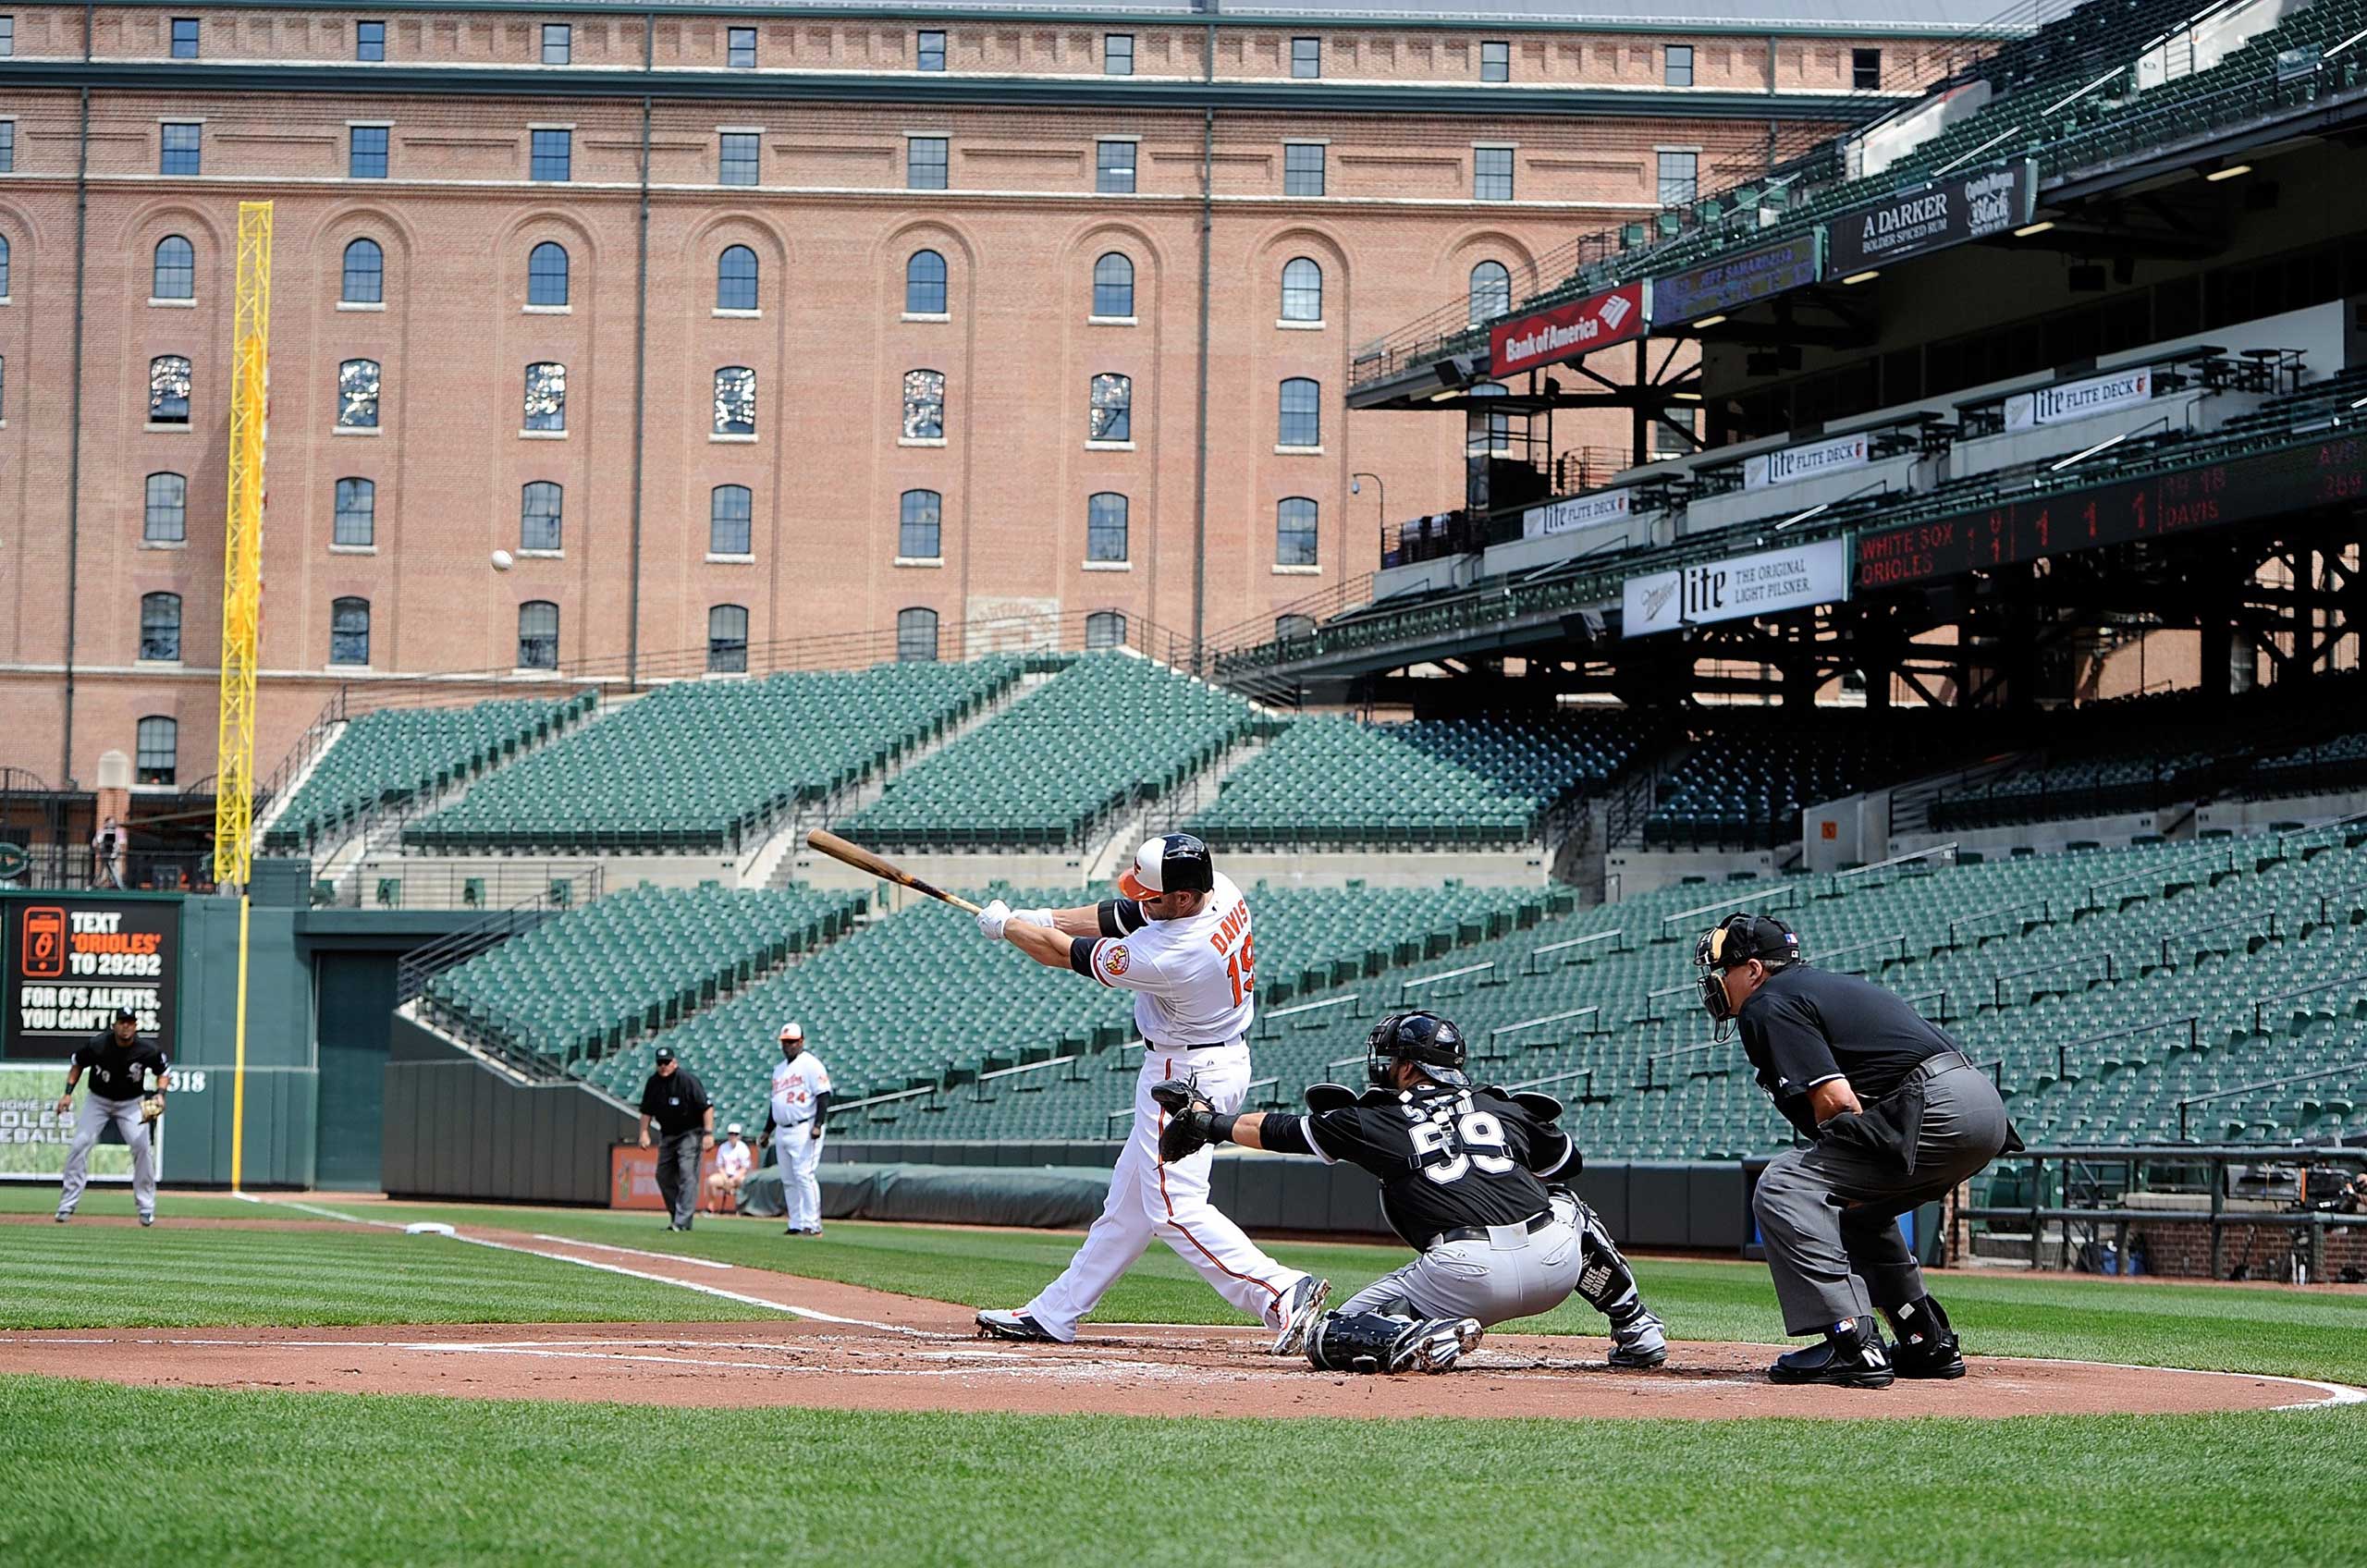 Chris Davis #19 of the Baltimore Orioles hits a three-run home run in the first inning against the Chicago White Sox at Oriole Park at Camden Yards in Baltimore on April 29, 2015.